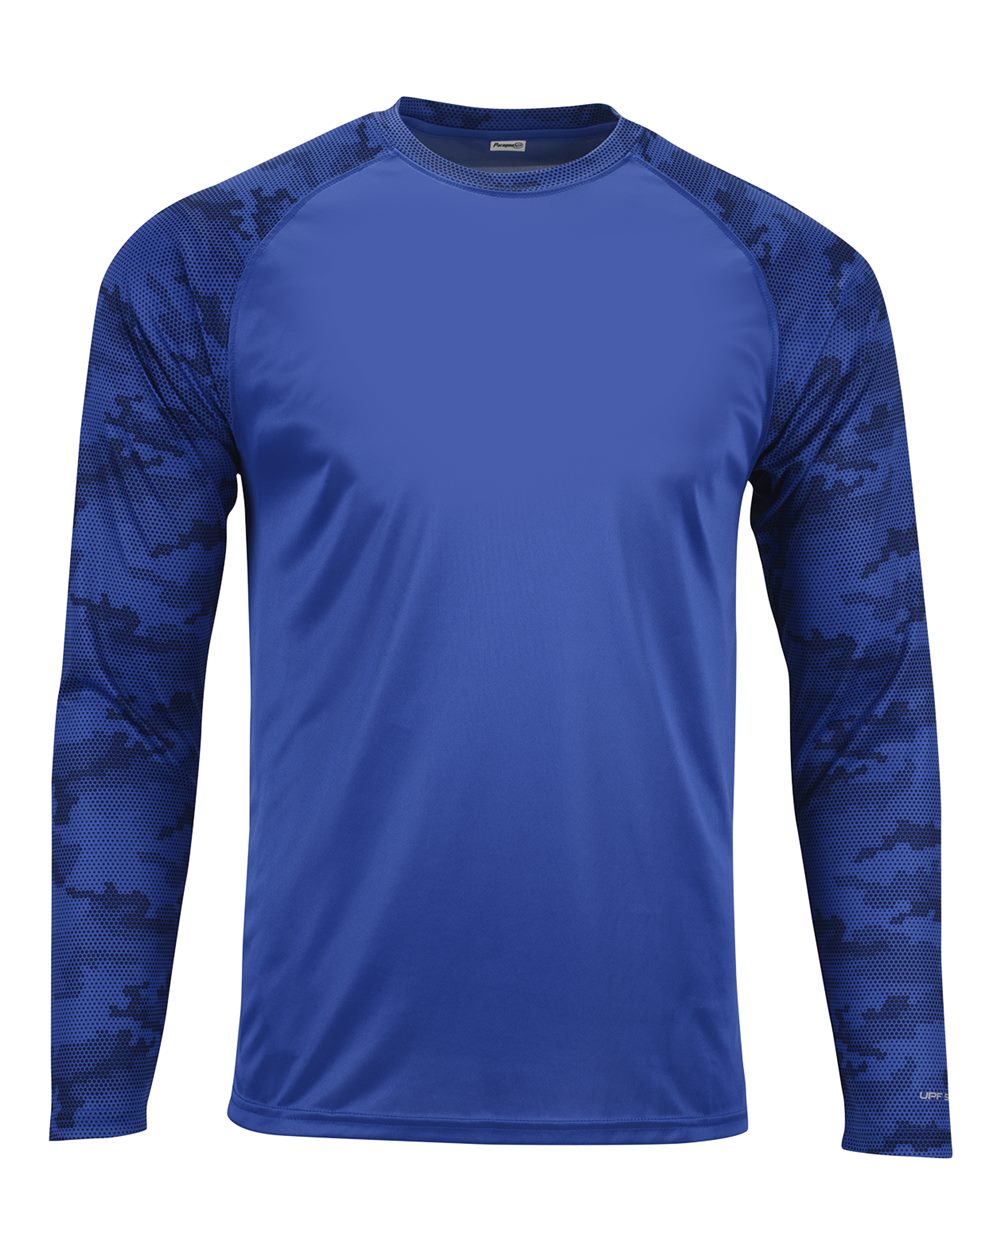 Paragon® - Cayman Performance Camo Colorblocked Long Sleeve T-Shirt, 3.5  Oz./yd², 100% Microfiber Performance Polyester - 216, This Performance  Camo Long Sleeve T-Shirt Delivers Unbeatable Style and Functionality for  Any Activity, RADYAN